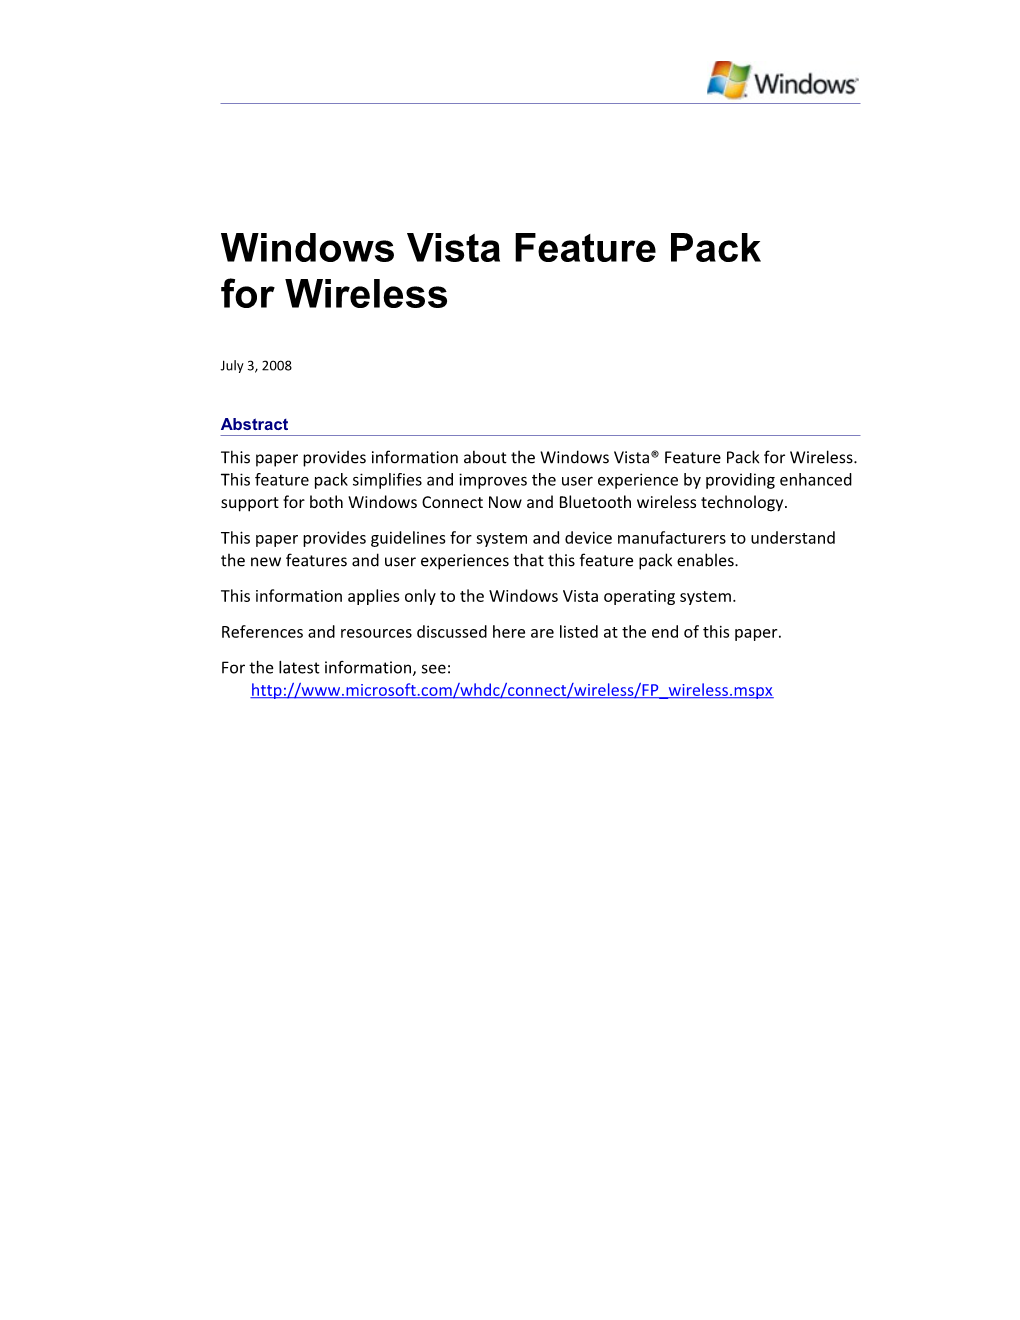 Windows Vista Feature Pack for Wireless